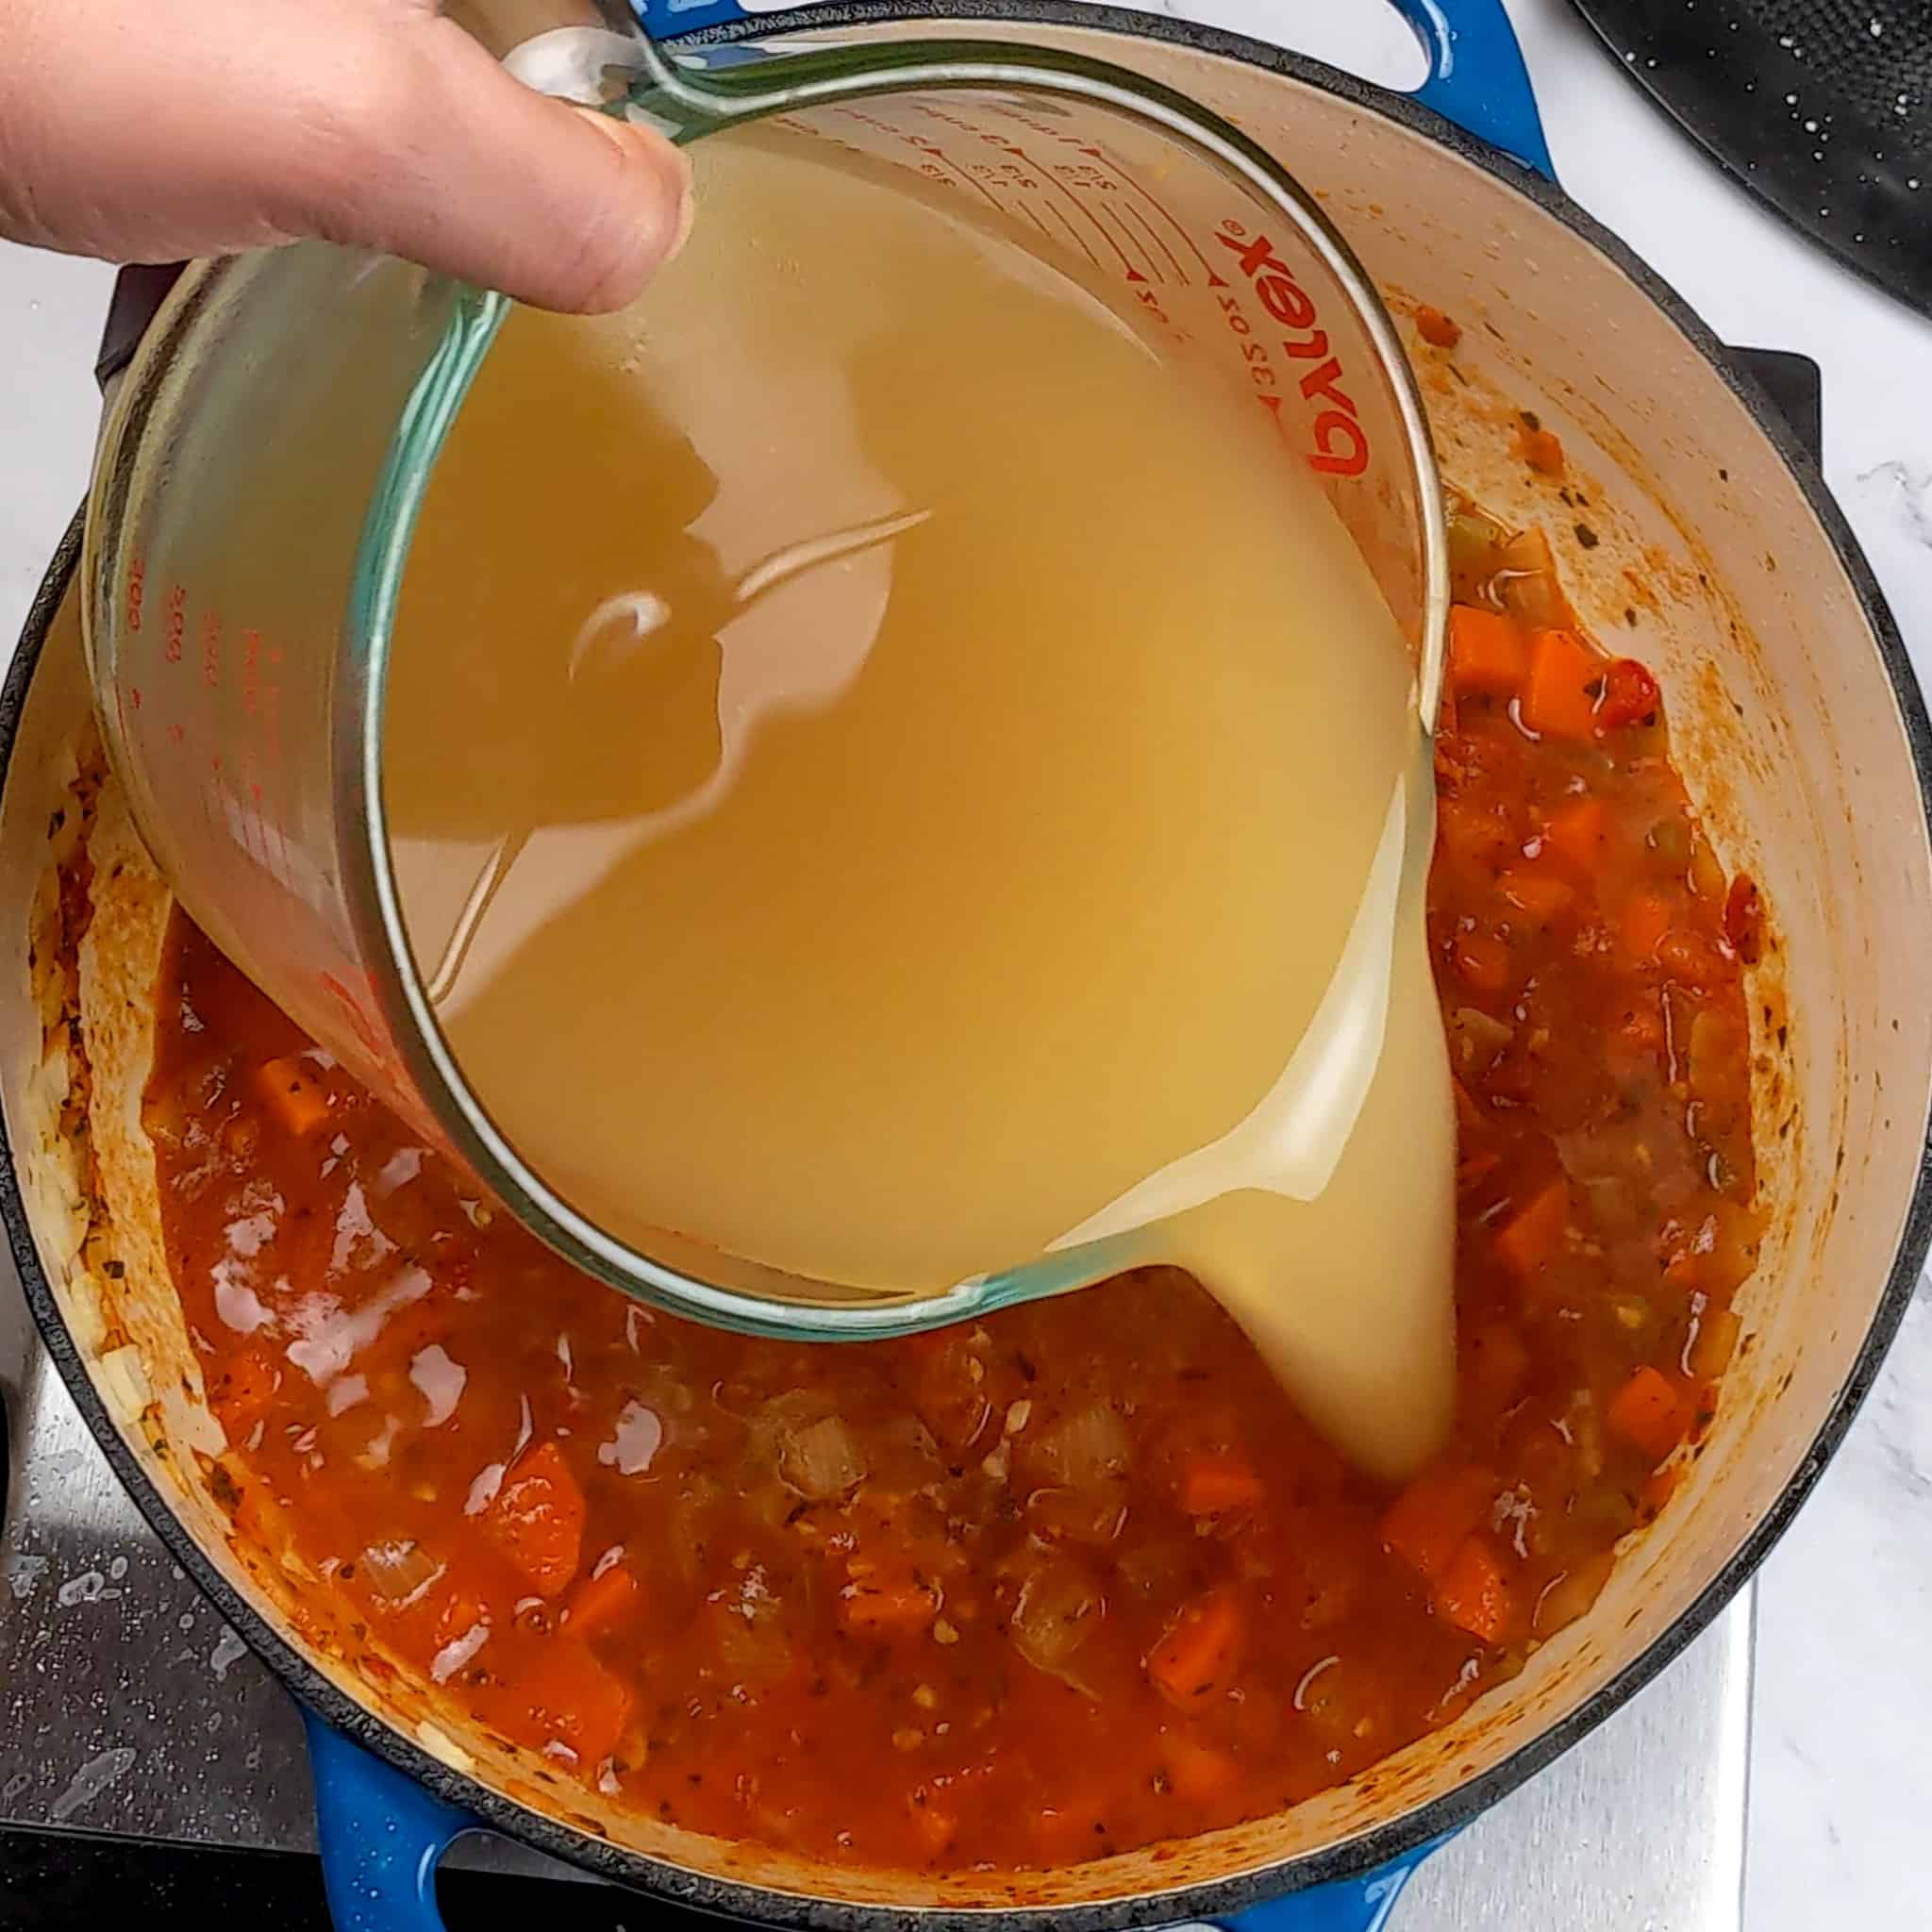 low-sodium chicken broth being poured into cooked down campari tomatoes mixed in with herbs and mirepoix in an enameled dutch oven.